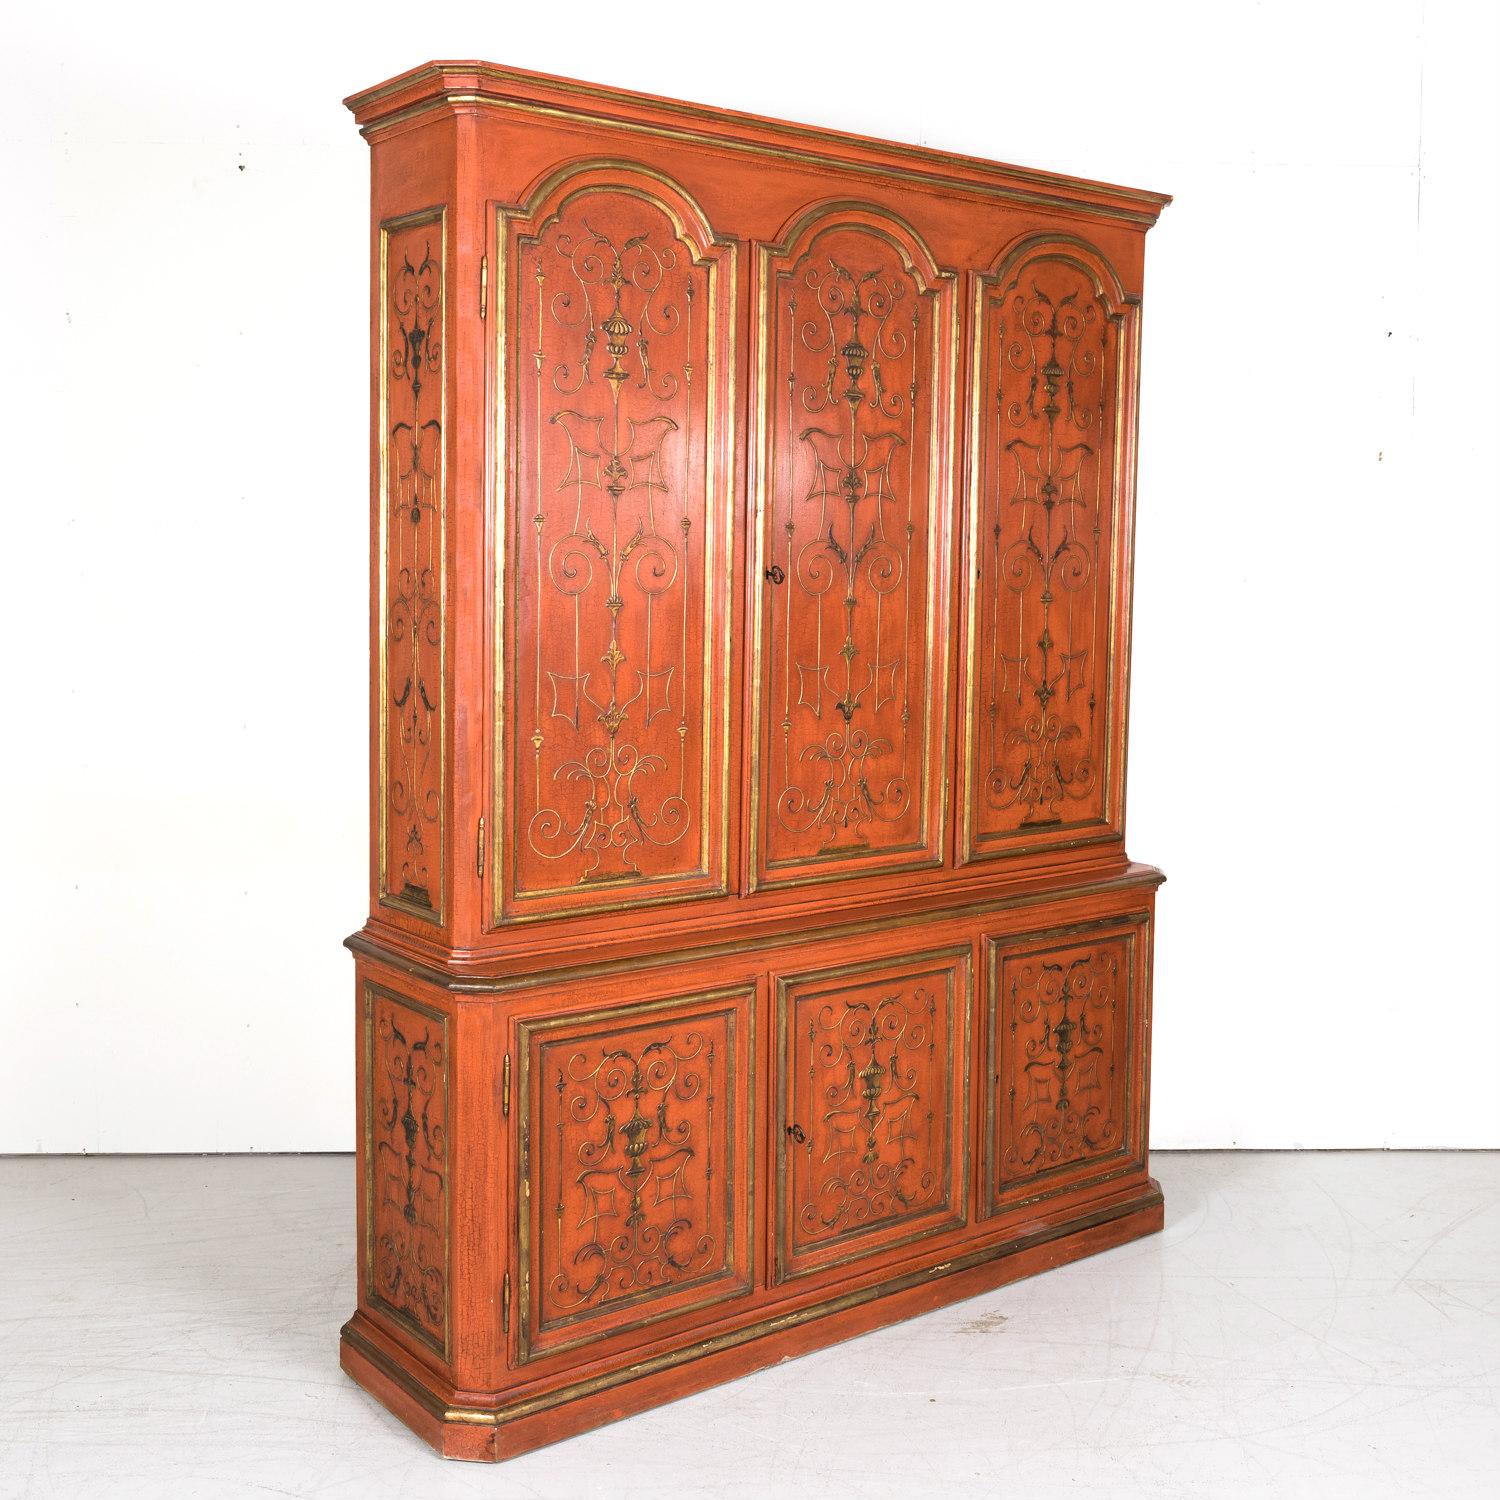 A vintage mid-20th century red lacquered French Louis XIV style buffet deux corps having chinoiserie motifs hand painted in a raised pigment style in parcel gilt, circa 1940s. The upper cabinet features three carved raised panel arched doors that